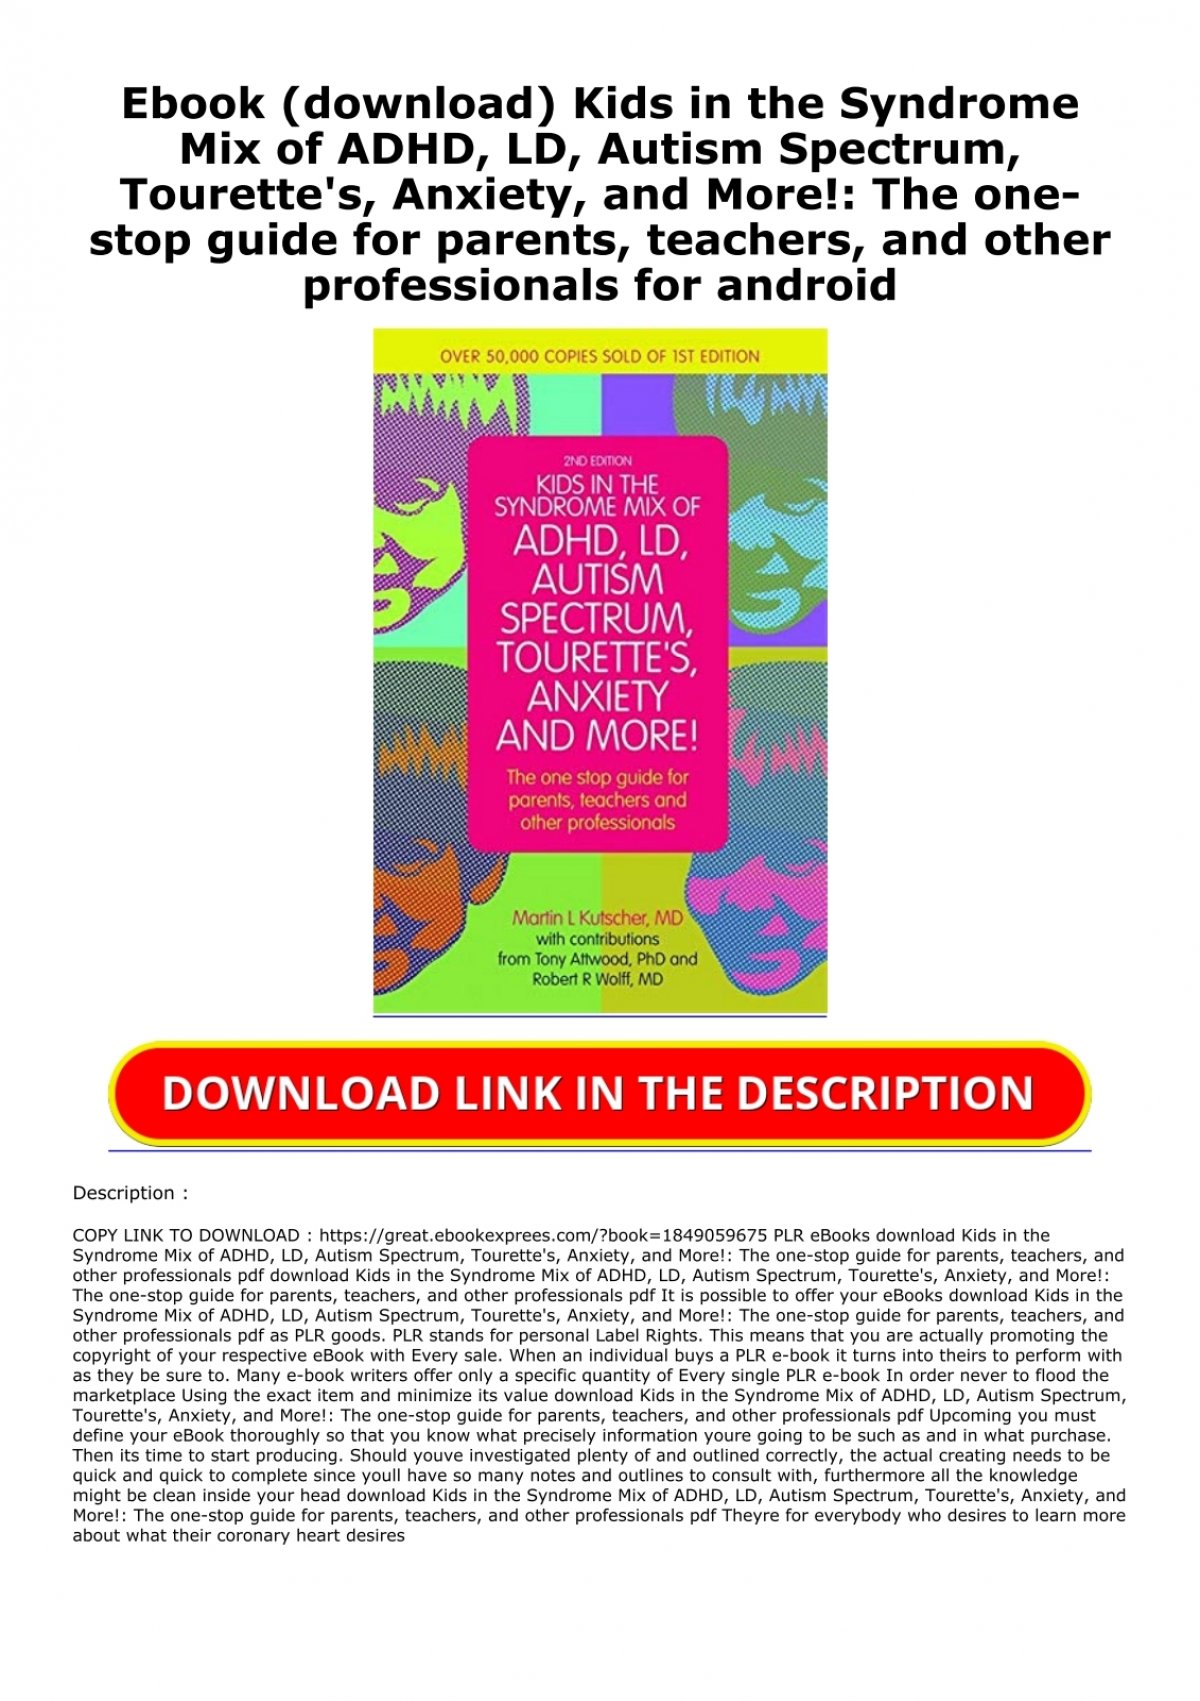 Ebook (download) Kids in the Syndrome Mix of ADHD, Autism Spectrum, Anxiety, and More!: The guide for parents, teachers, and other professionals for android